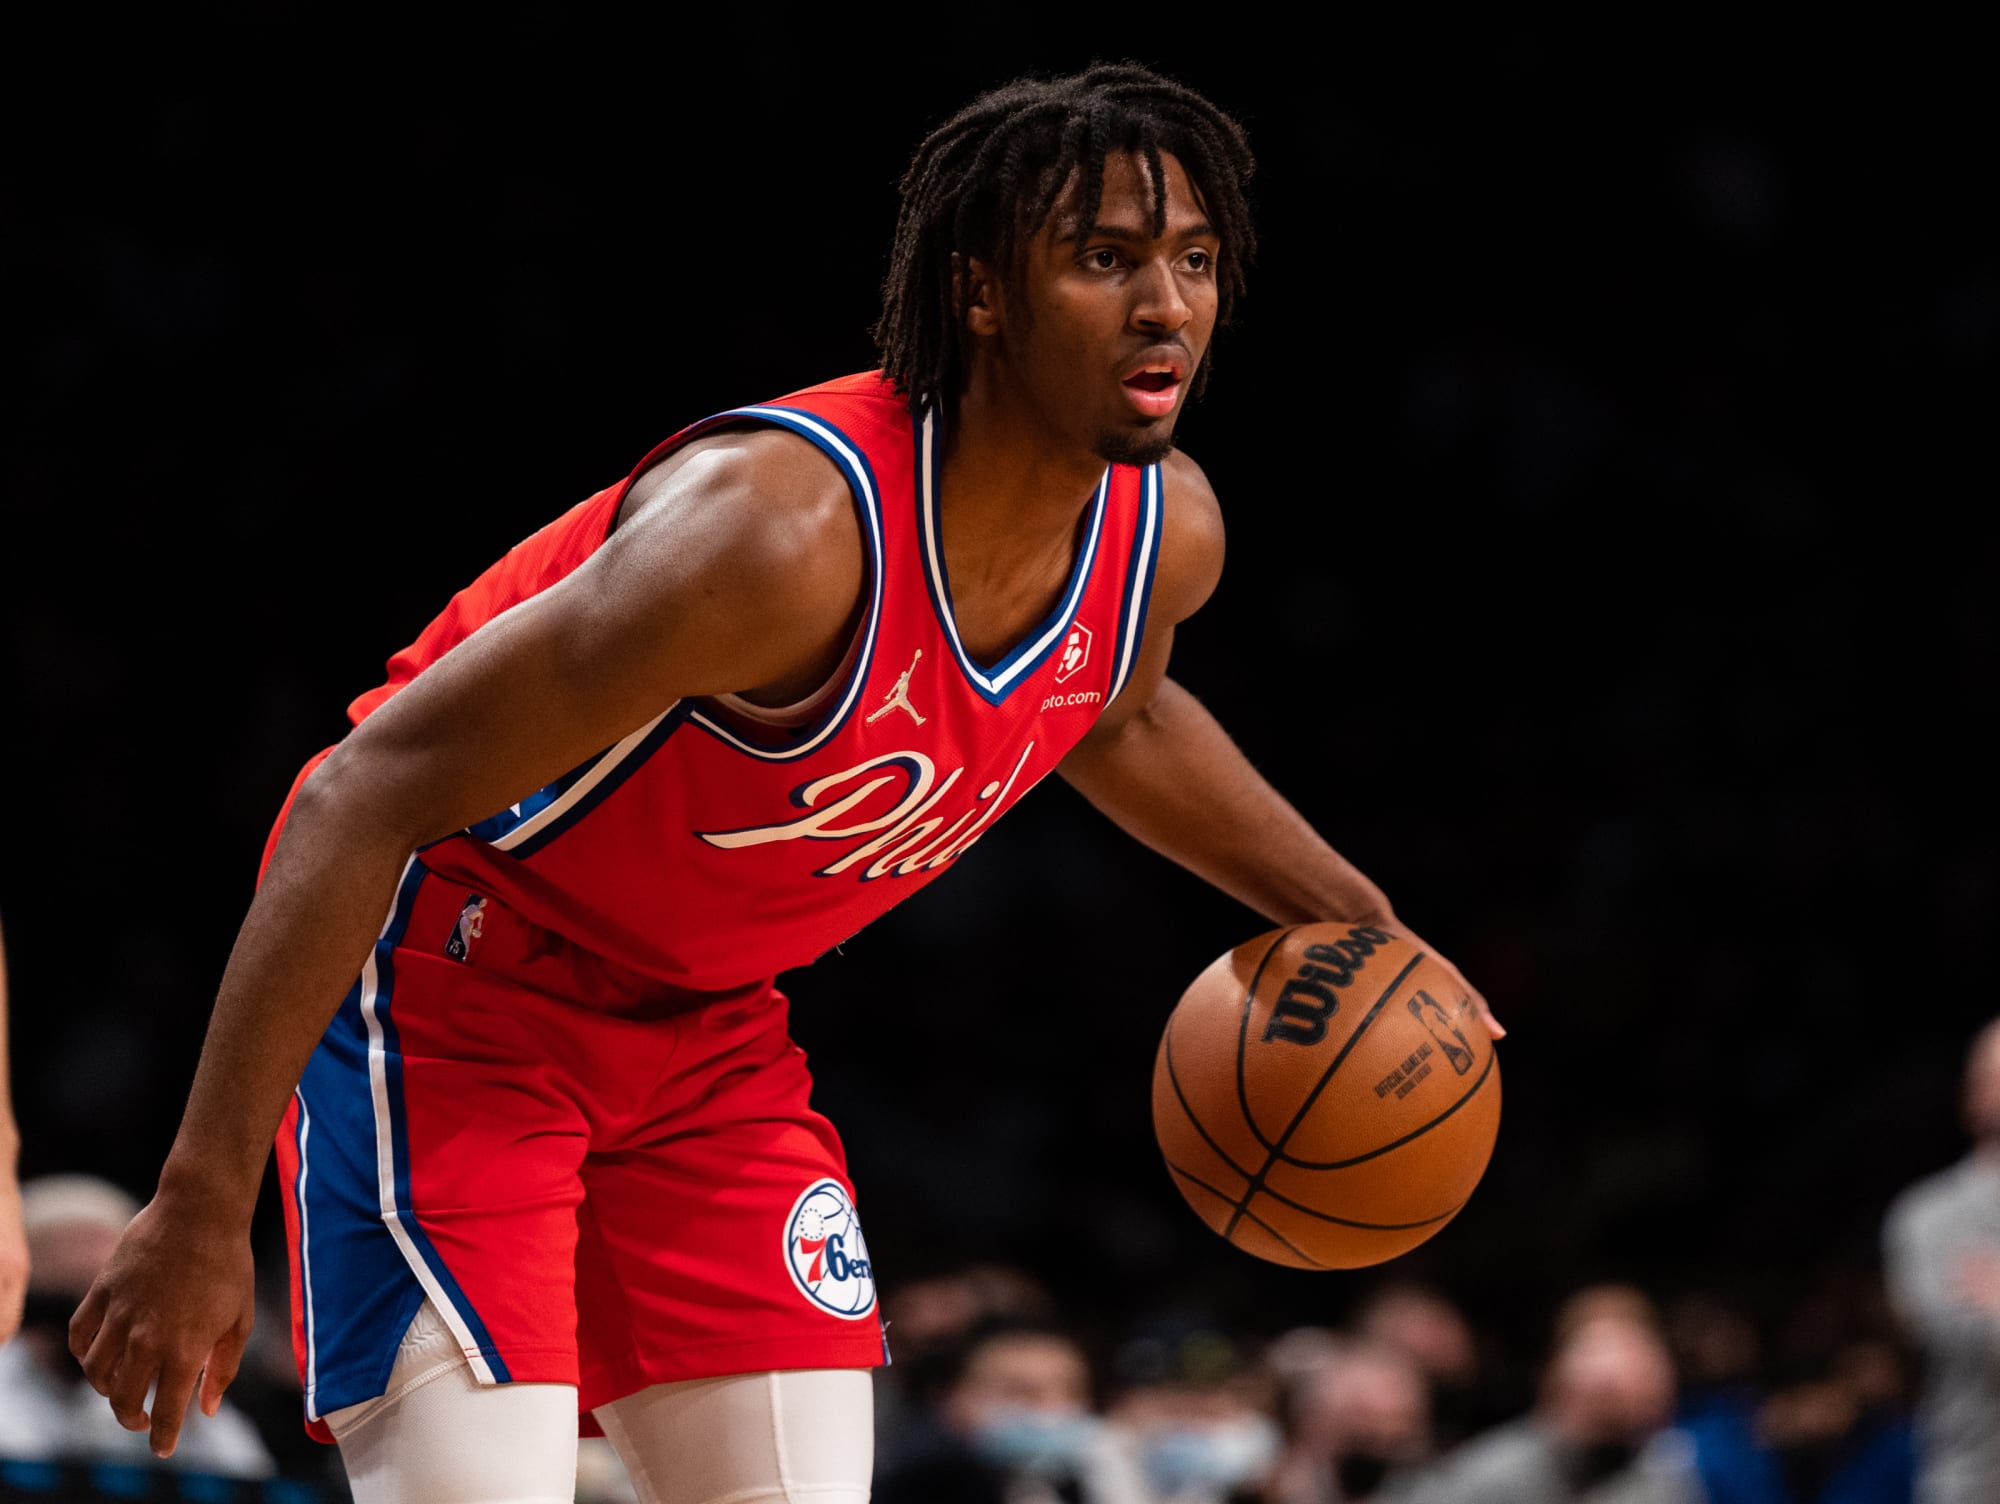 Tyrese Maxey Cannot be Untouchable - Philadelphia Sports Nation